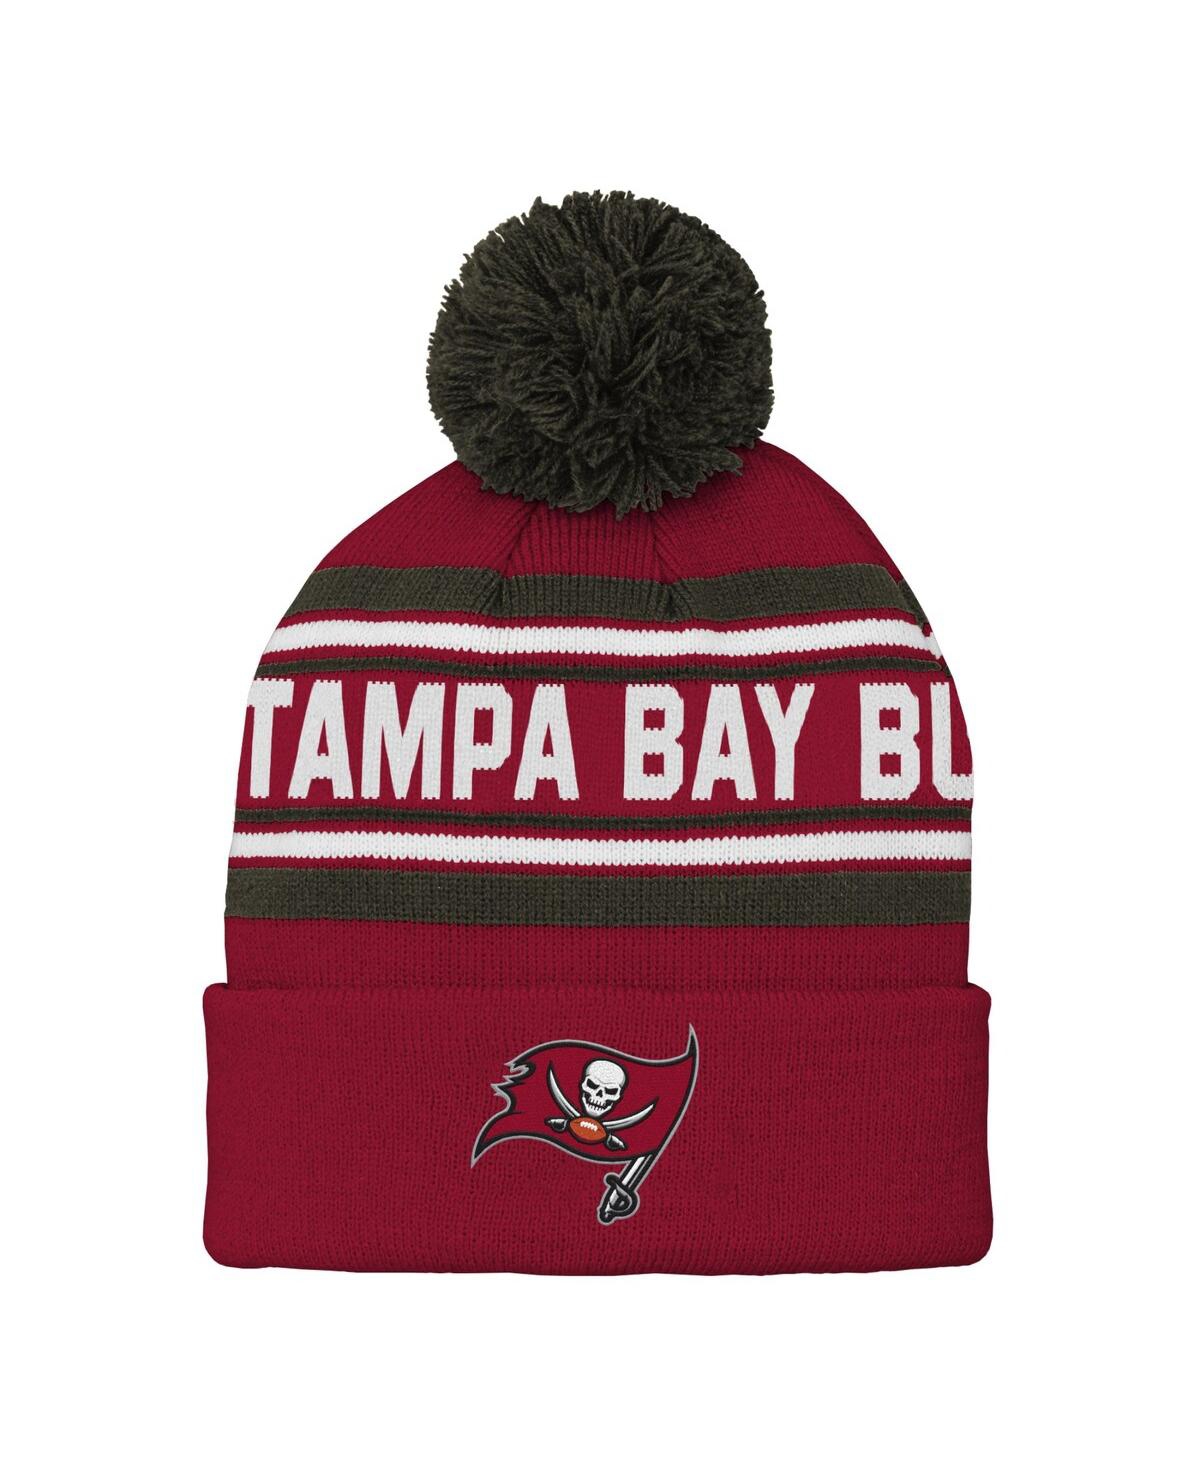 Outerstuff Kids' Youth Boys And Girls Red Tampa Bay Buccaneers Jacquard Cuffed Knit Hat With Pom